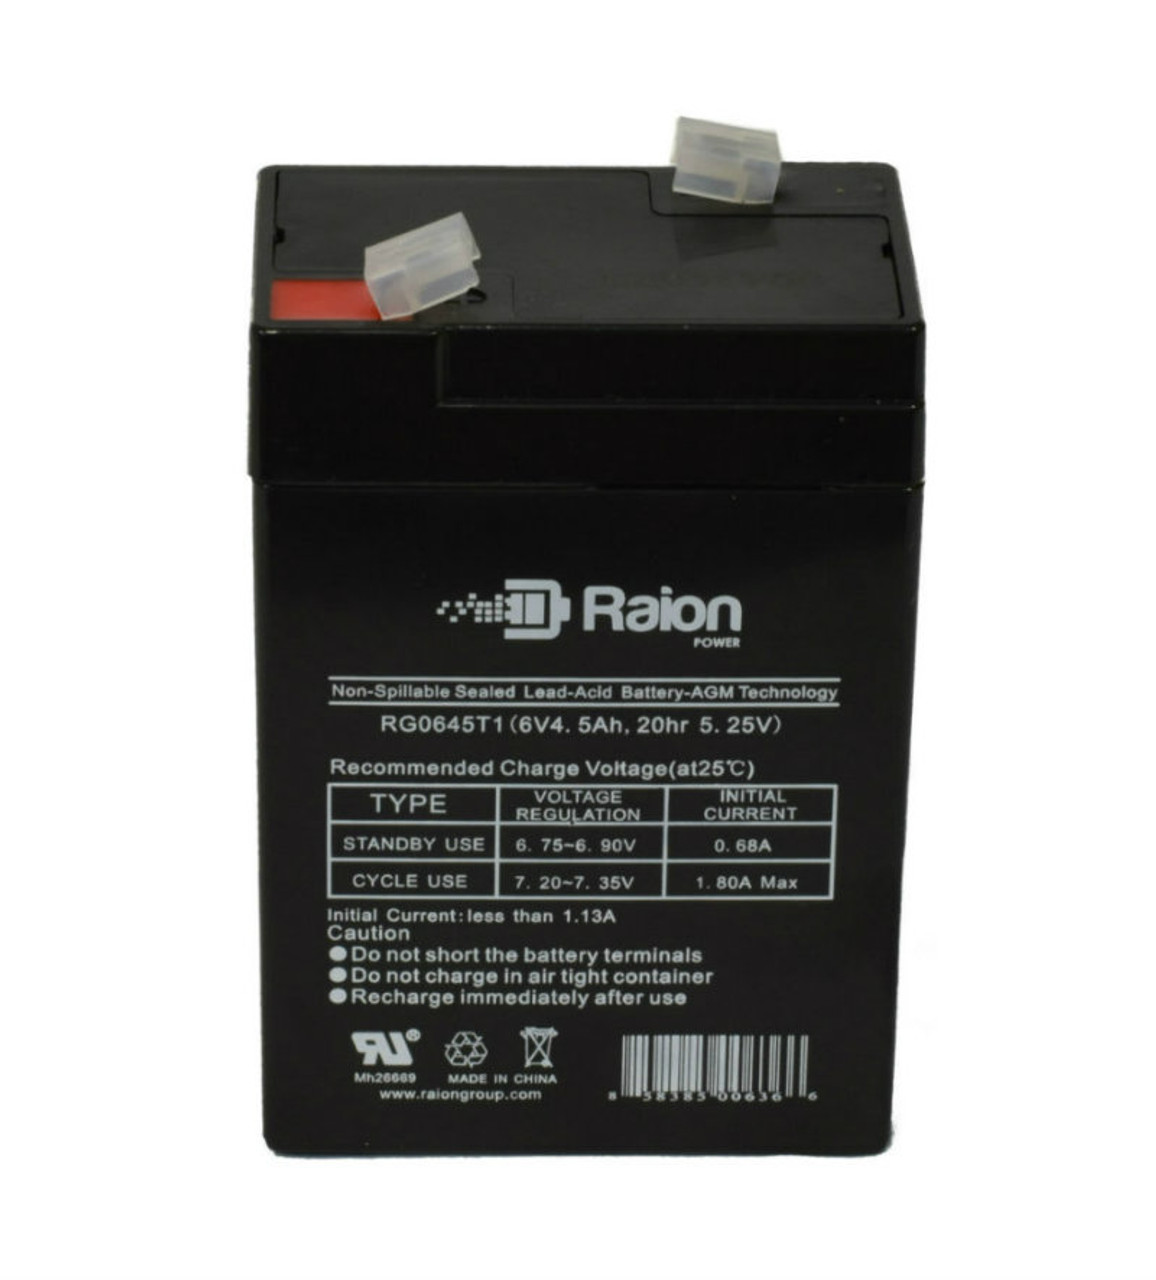 Raion Power RG0645T1 Replacement Battery Cartridge for XYC HR619W